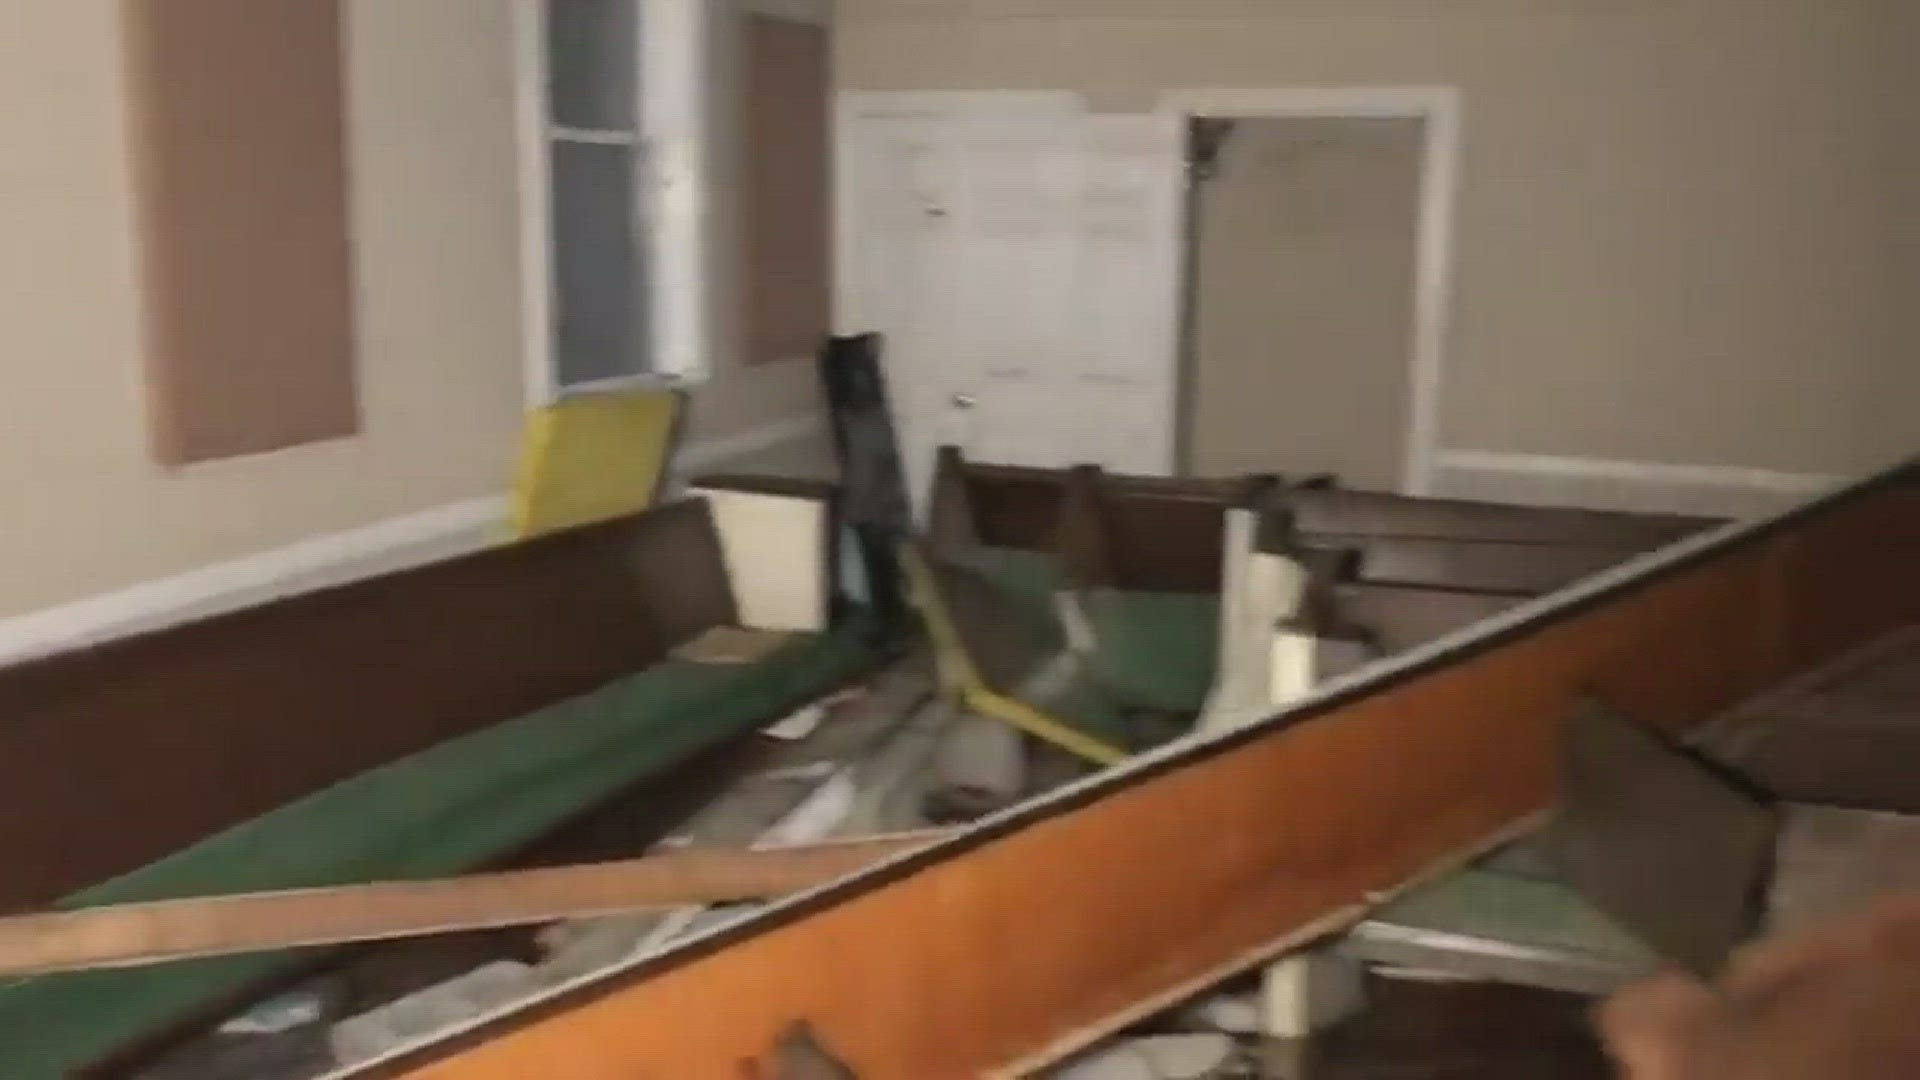 A cross remains on the wall after a church was hit by a tornado in Greensboro